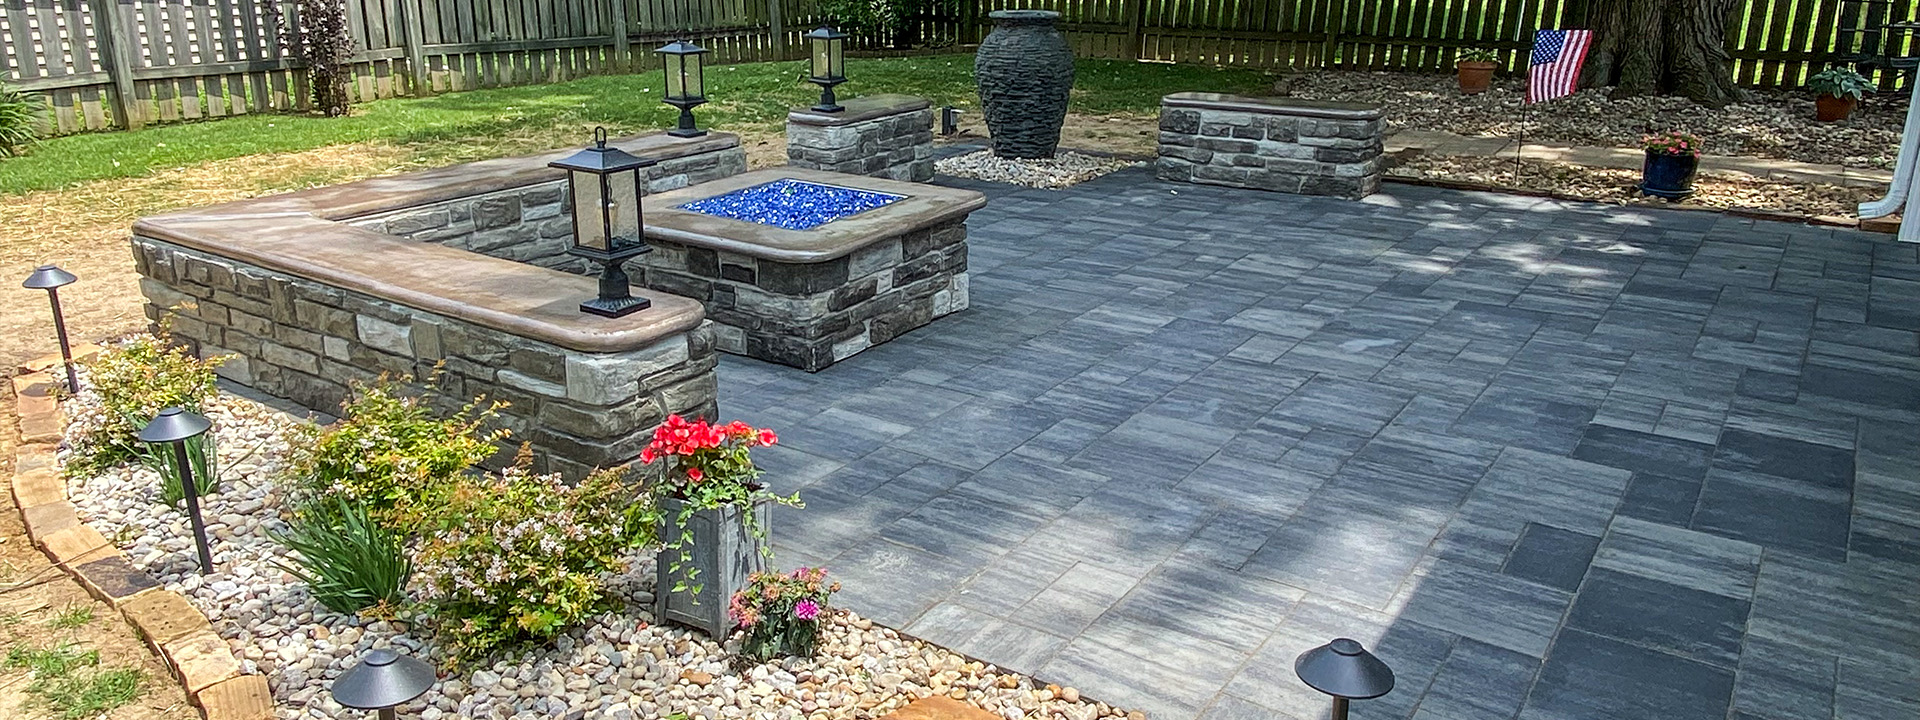 Stone Patio and Firepit Living Area